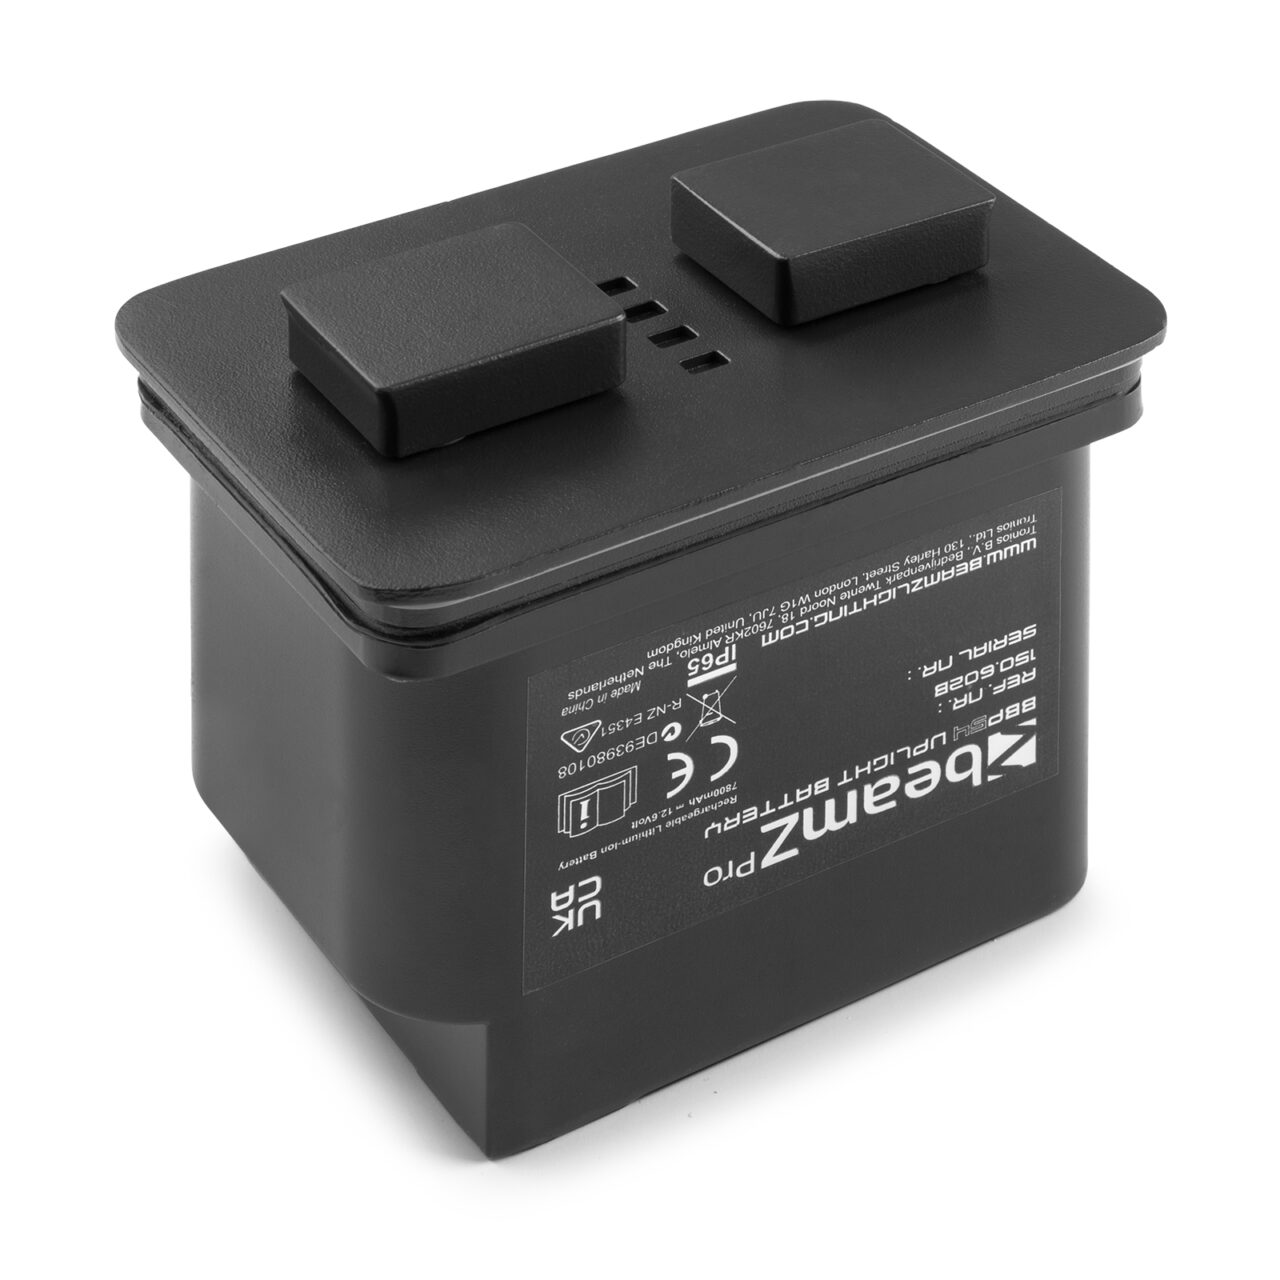 BBP5XB REPLACEMENT BATTERY PACK beamZ Pro